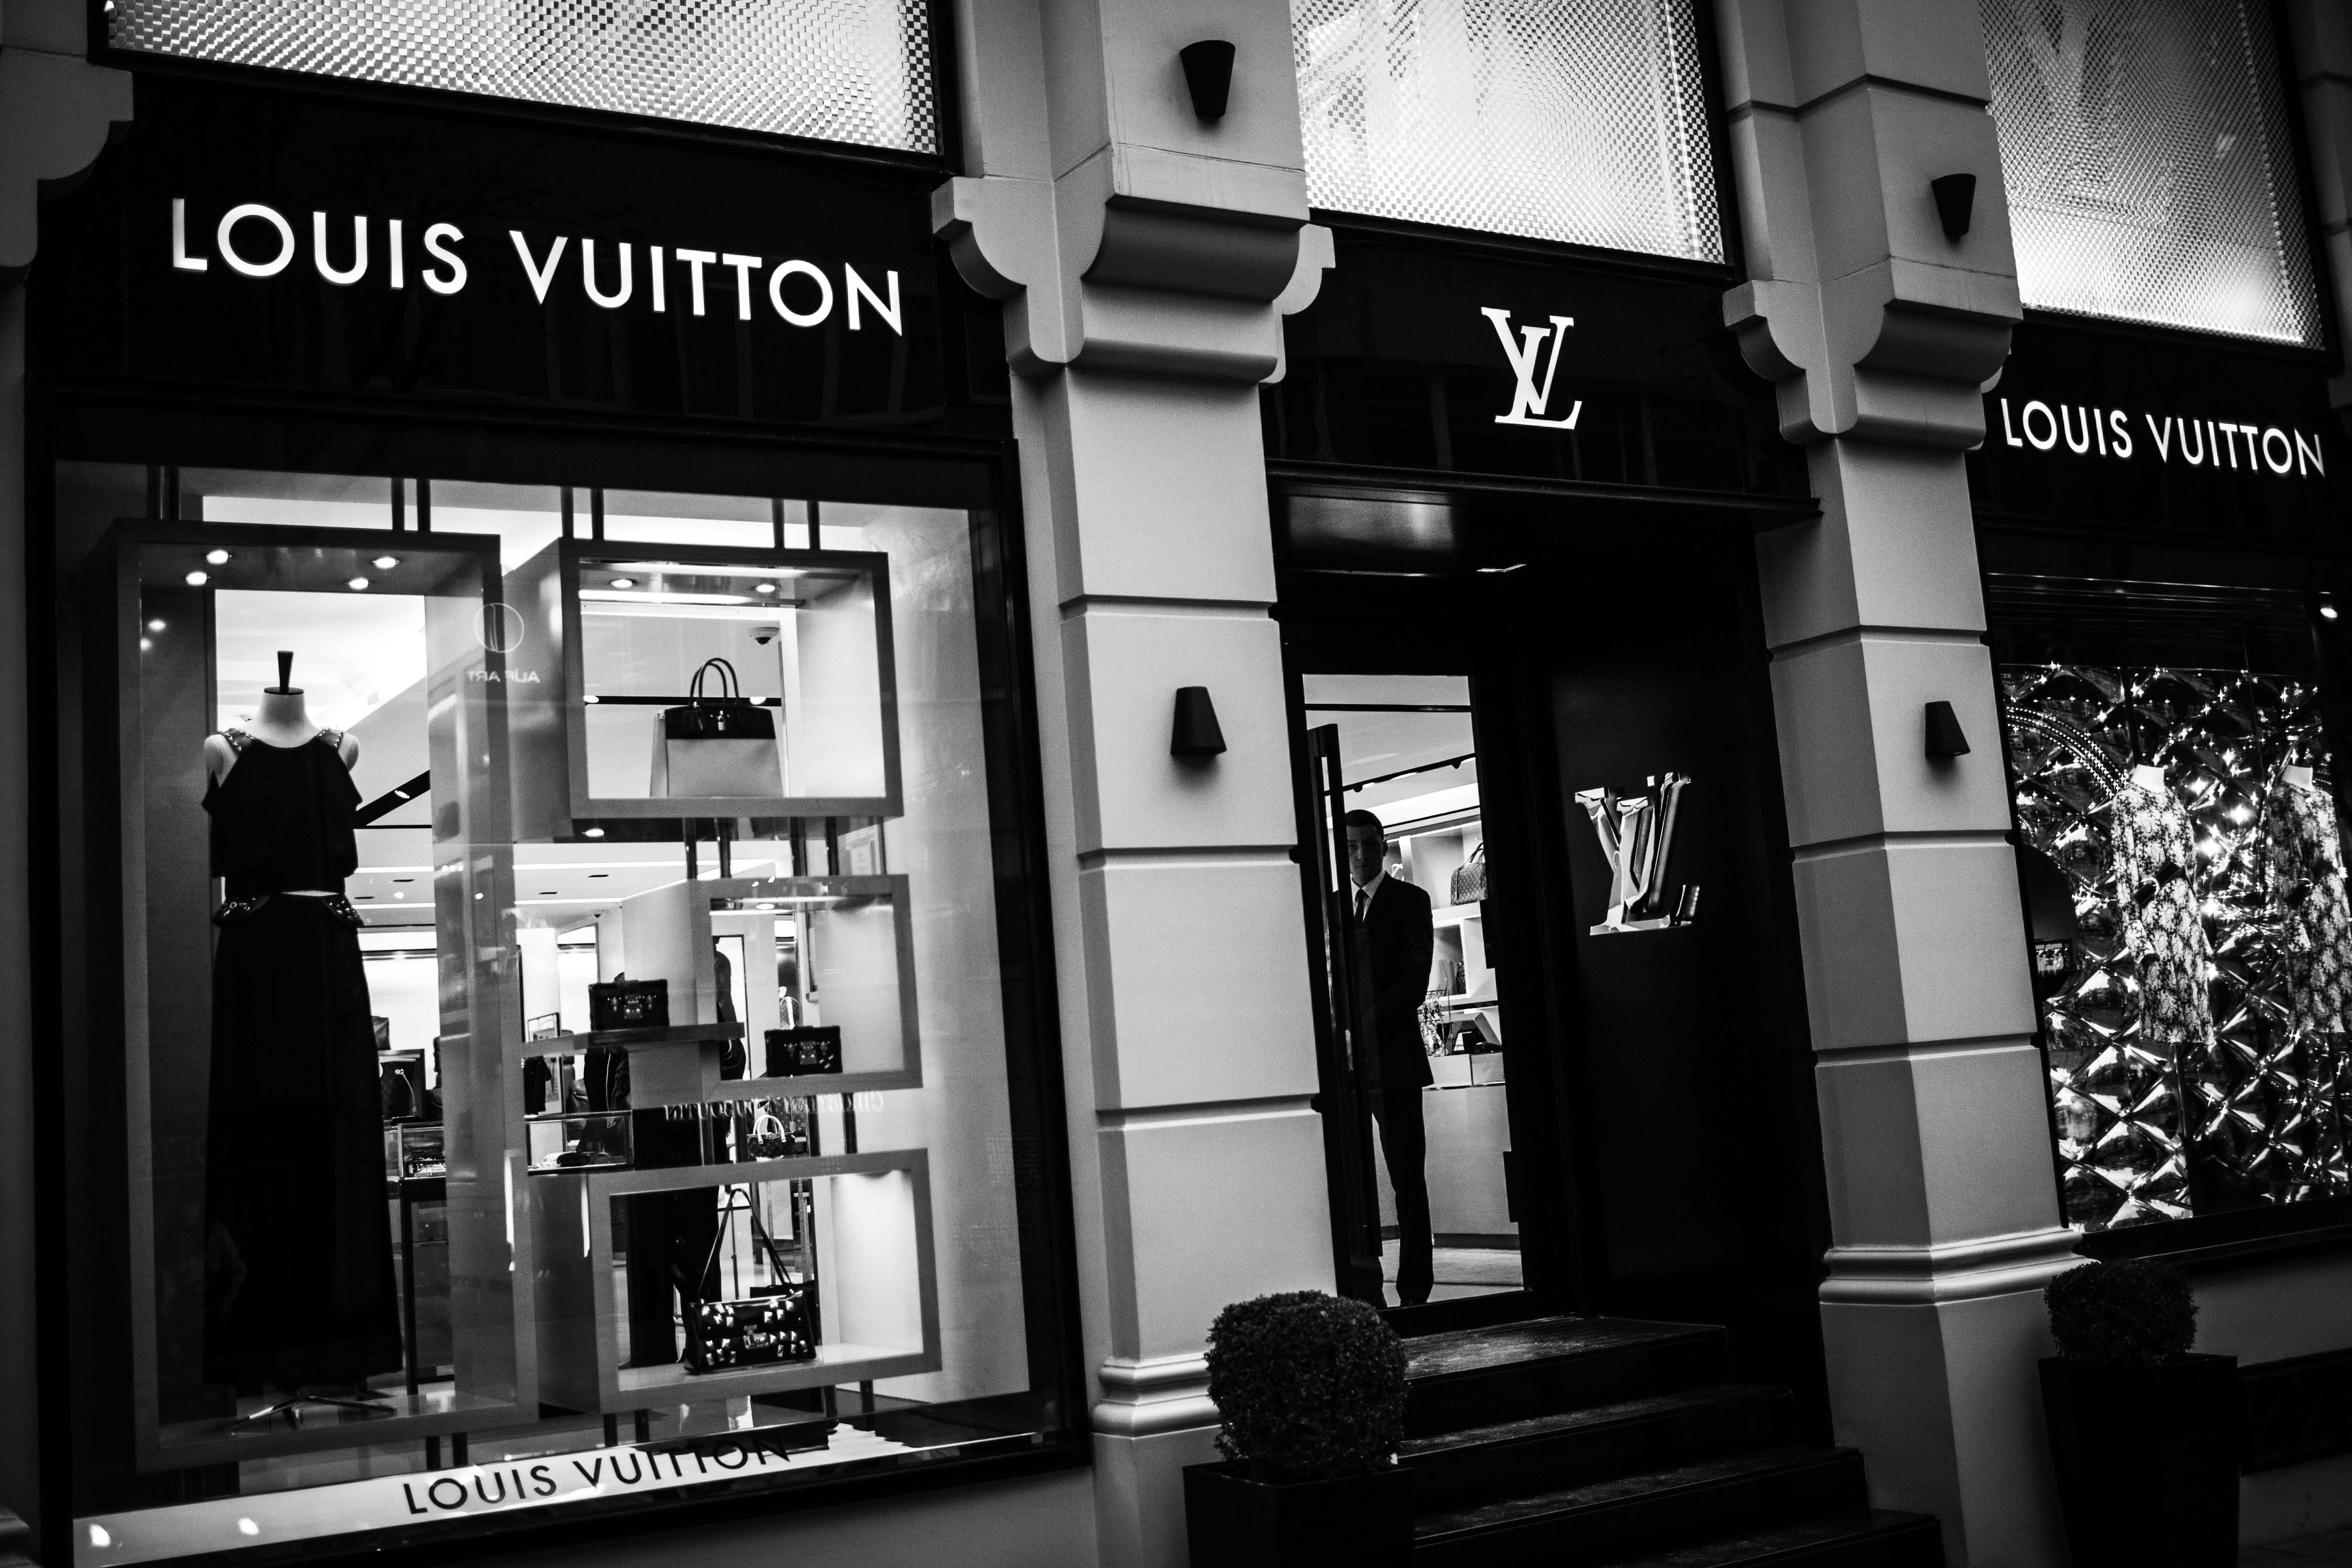 LVMH Moët Hennessy – Louis Vuitton - Business & Human Rights